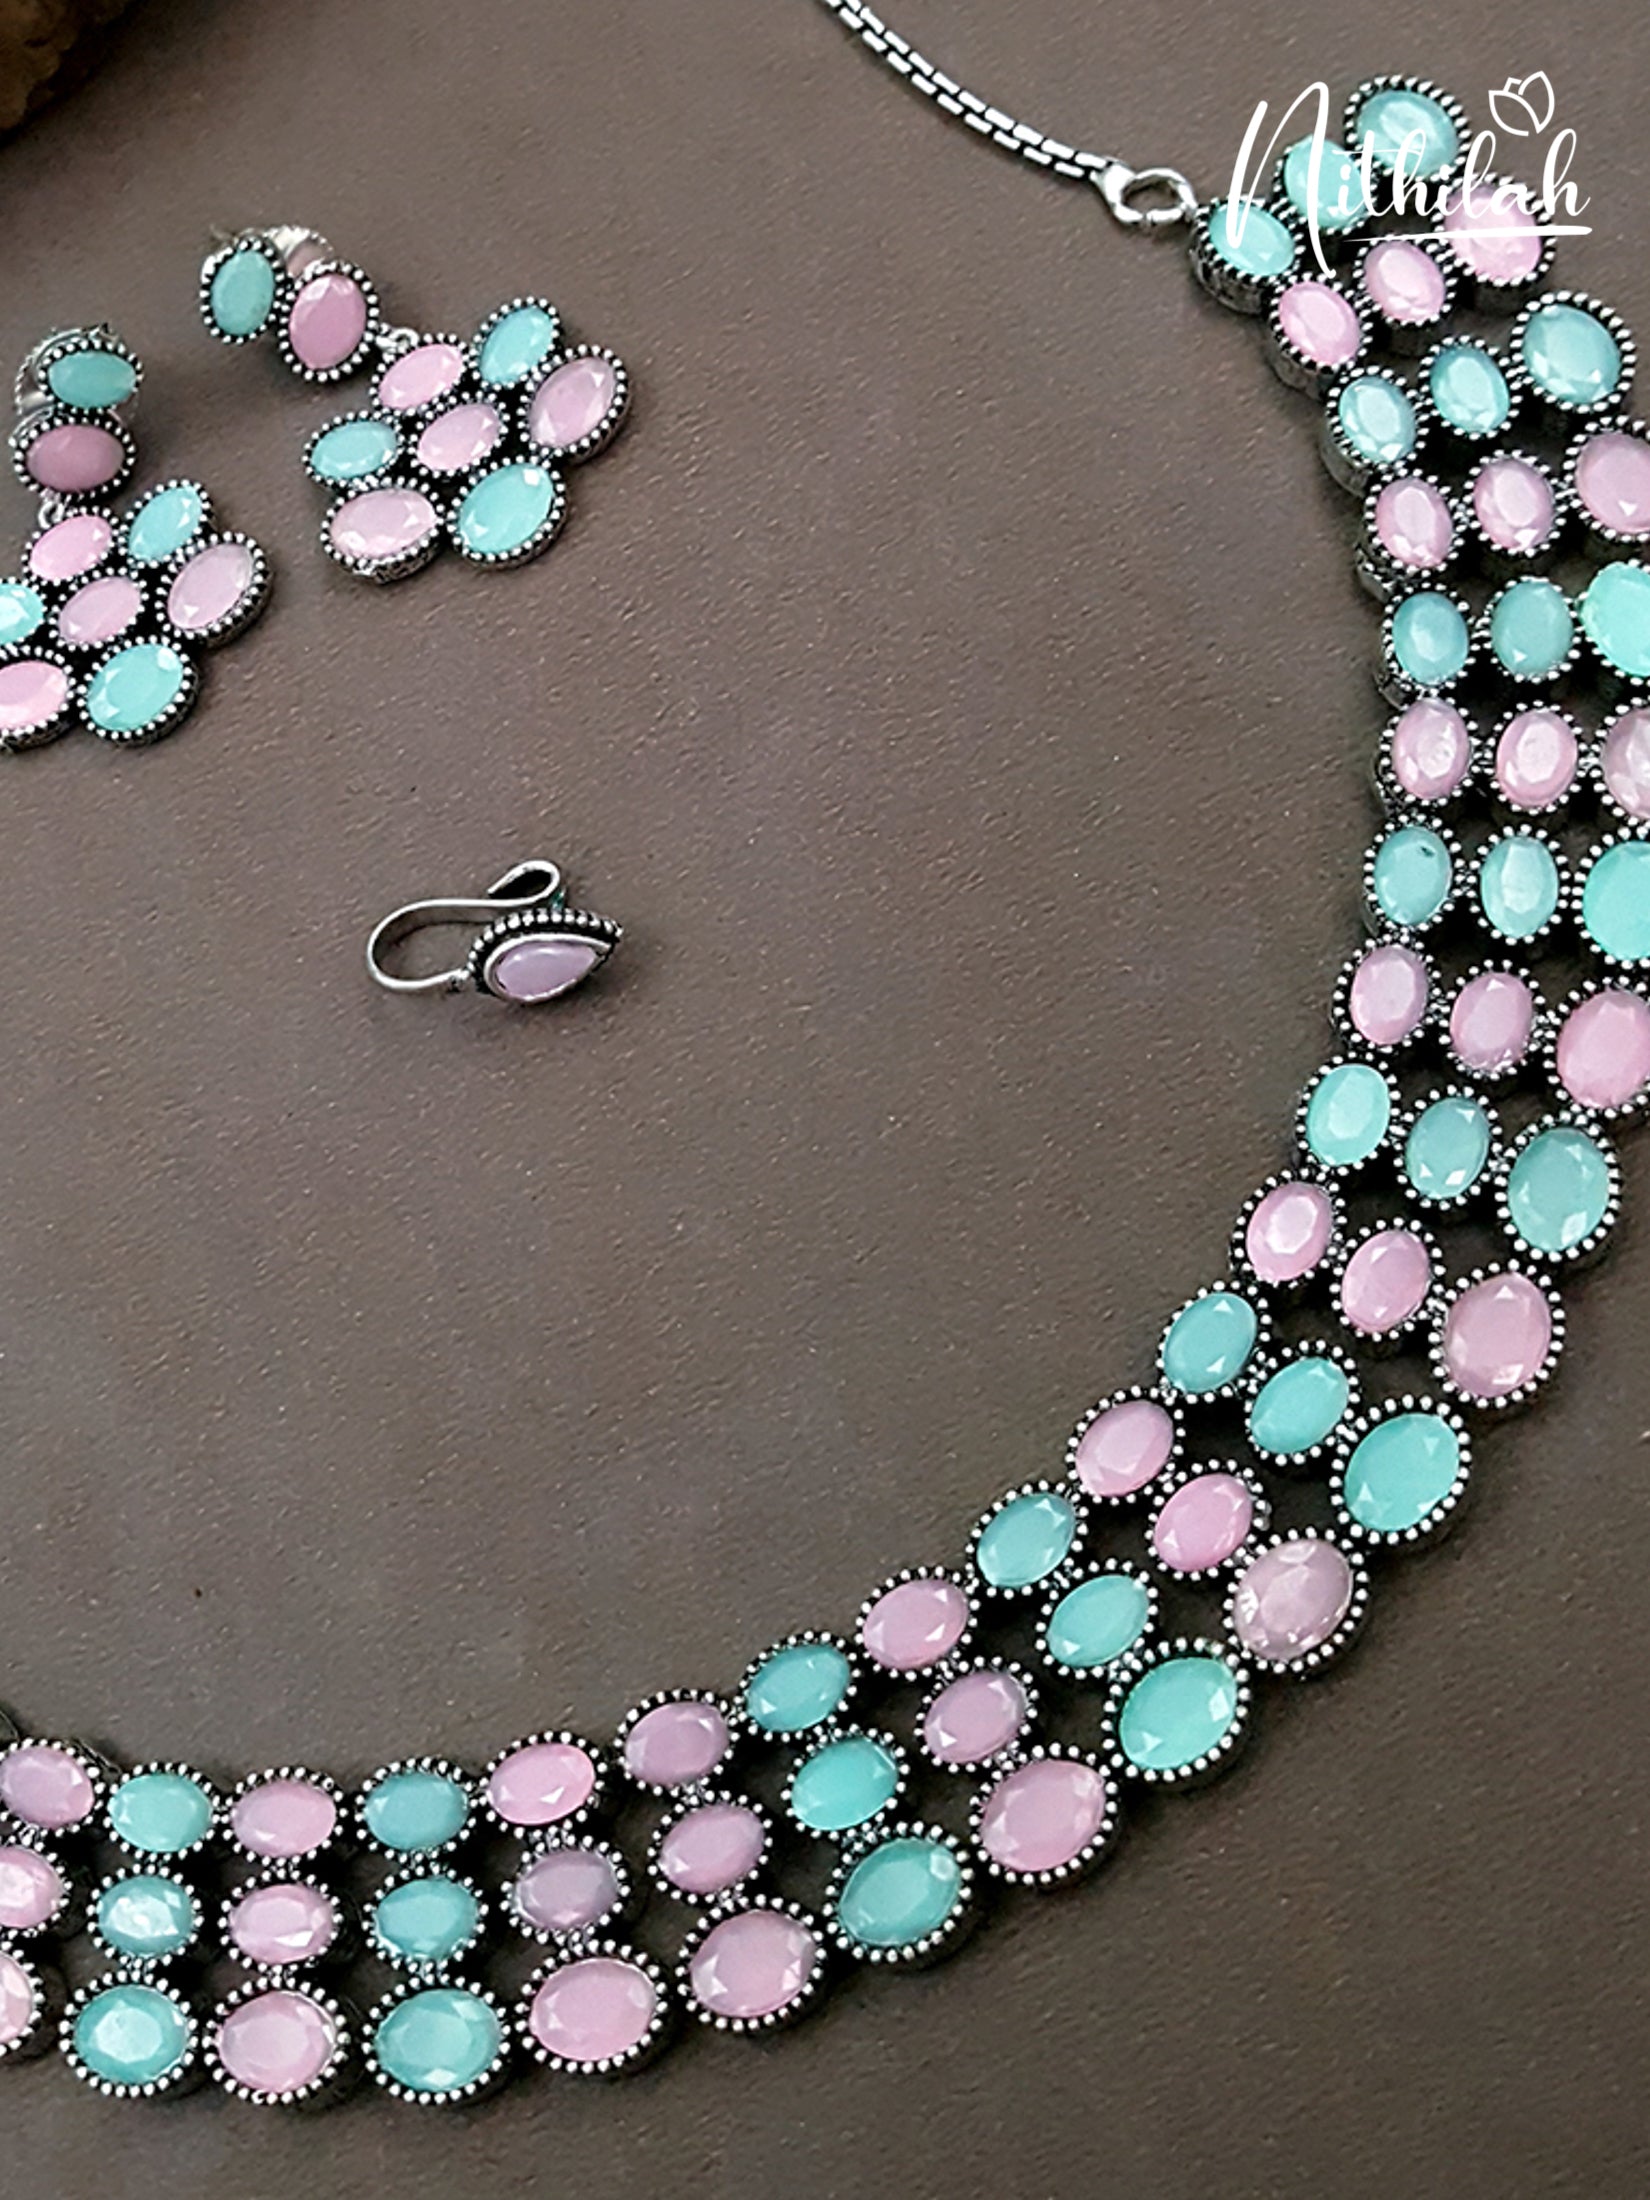 OVAL OXIDISED SILVER NECKLACE - PINK AND MINT